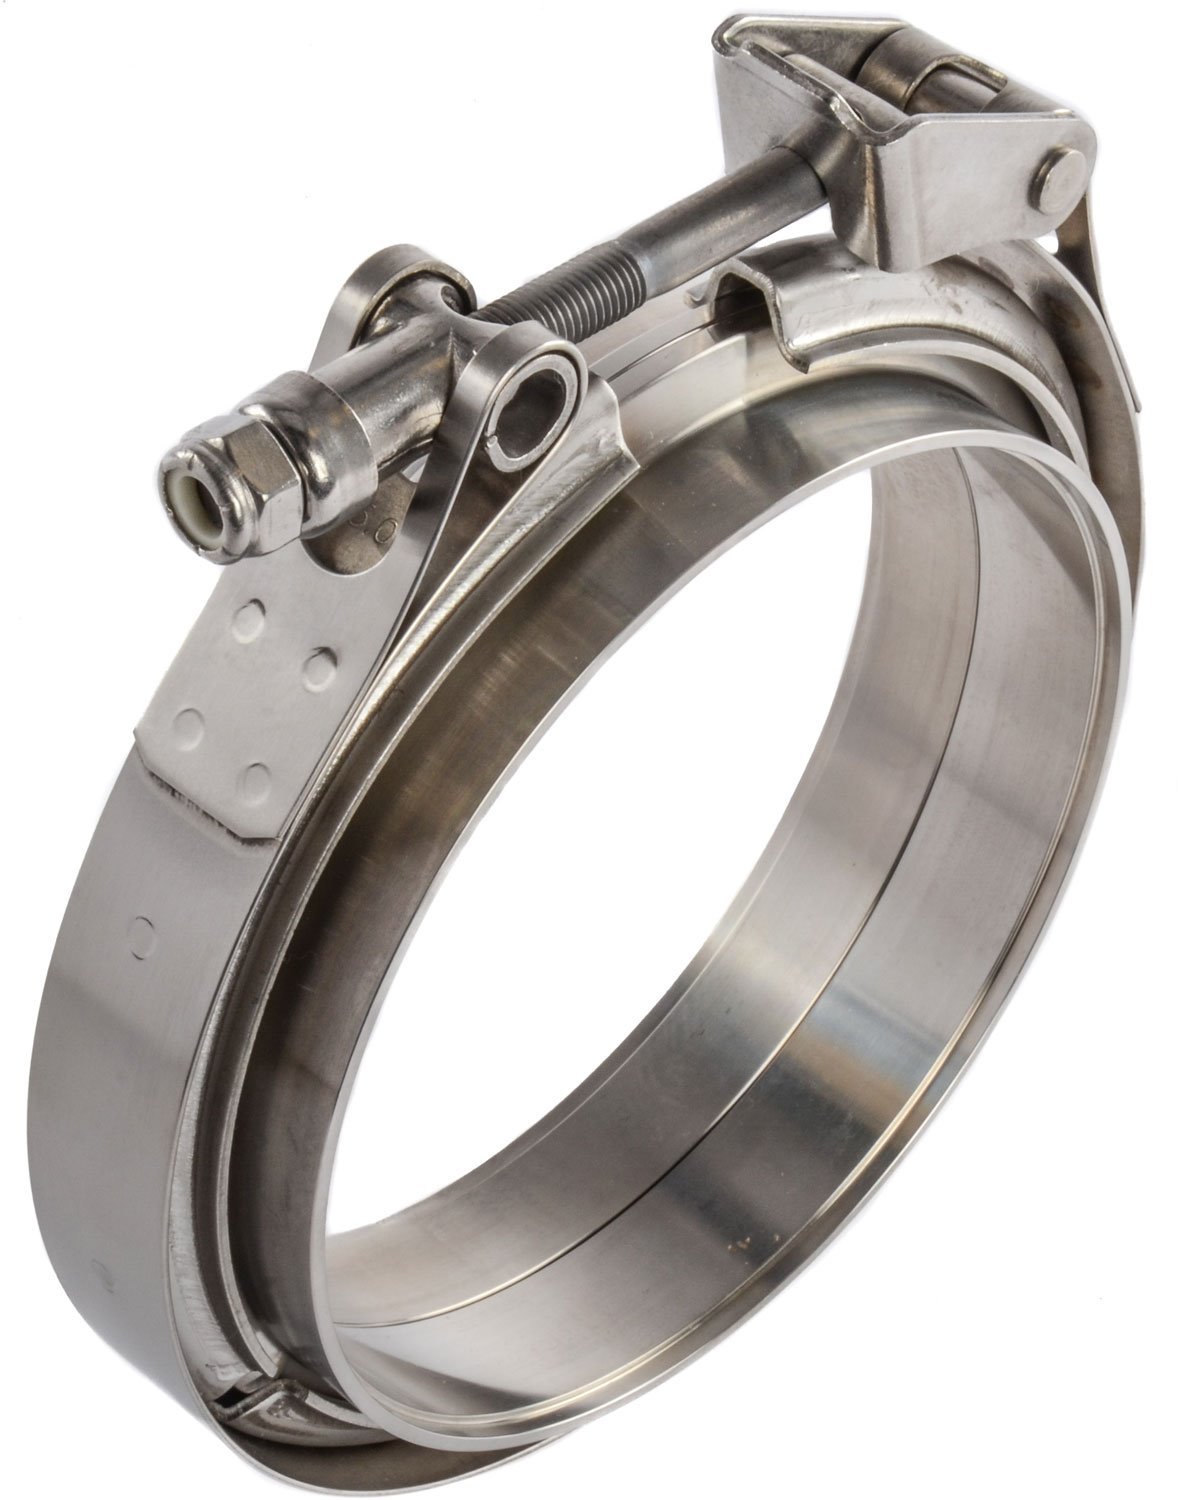 Stainless Steel Quick Release V-Band Clamp & Flanges 5 in.